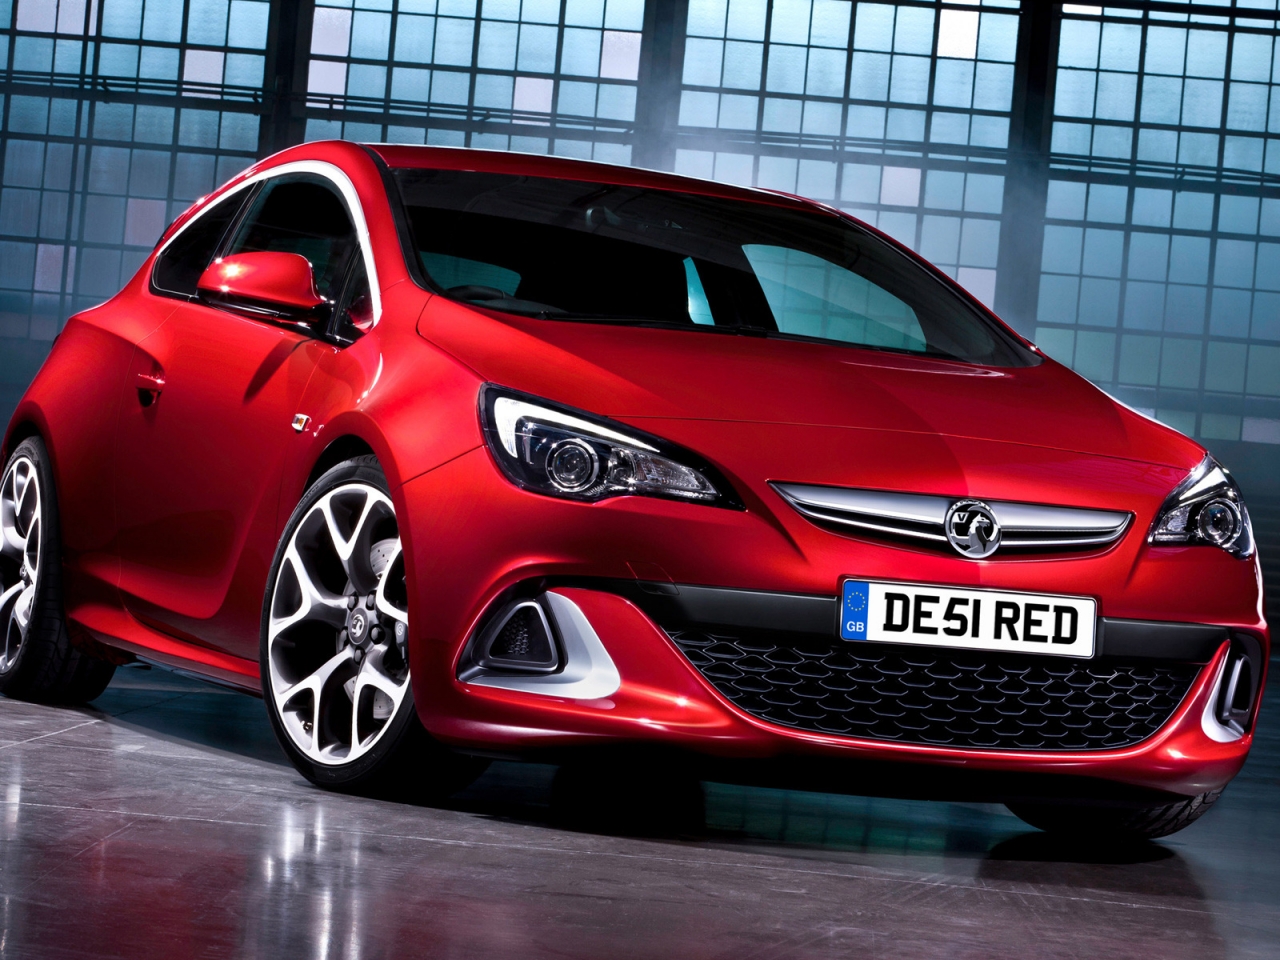 2012 Vauxhall Astra GTC for 1280 x 960 resolution